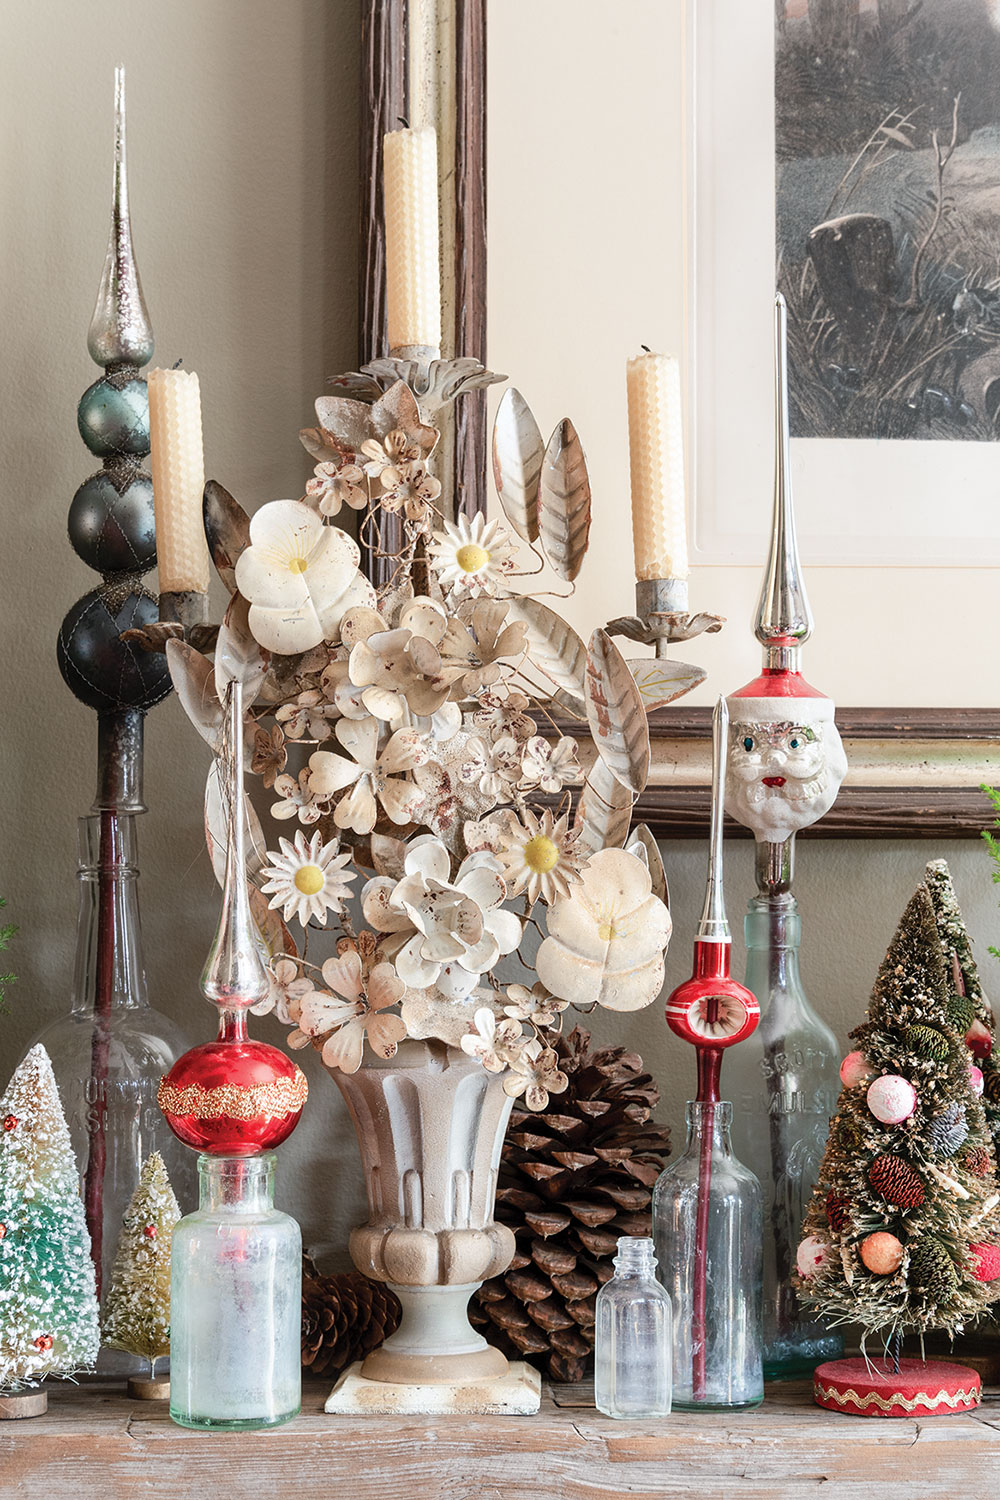 Holiday vignette with vintage blown-glass tree toppers in old bottles, retro-style small decorative Christmas trees, and a Tole candleholder fashioned to look like a vase of cream-colored flowers in the home of event planners Rick Davis and Christopher Vazquez